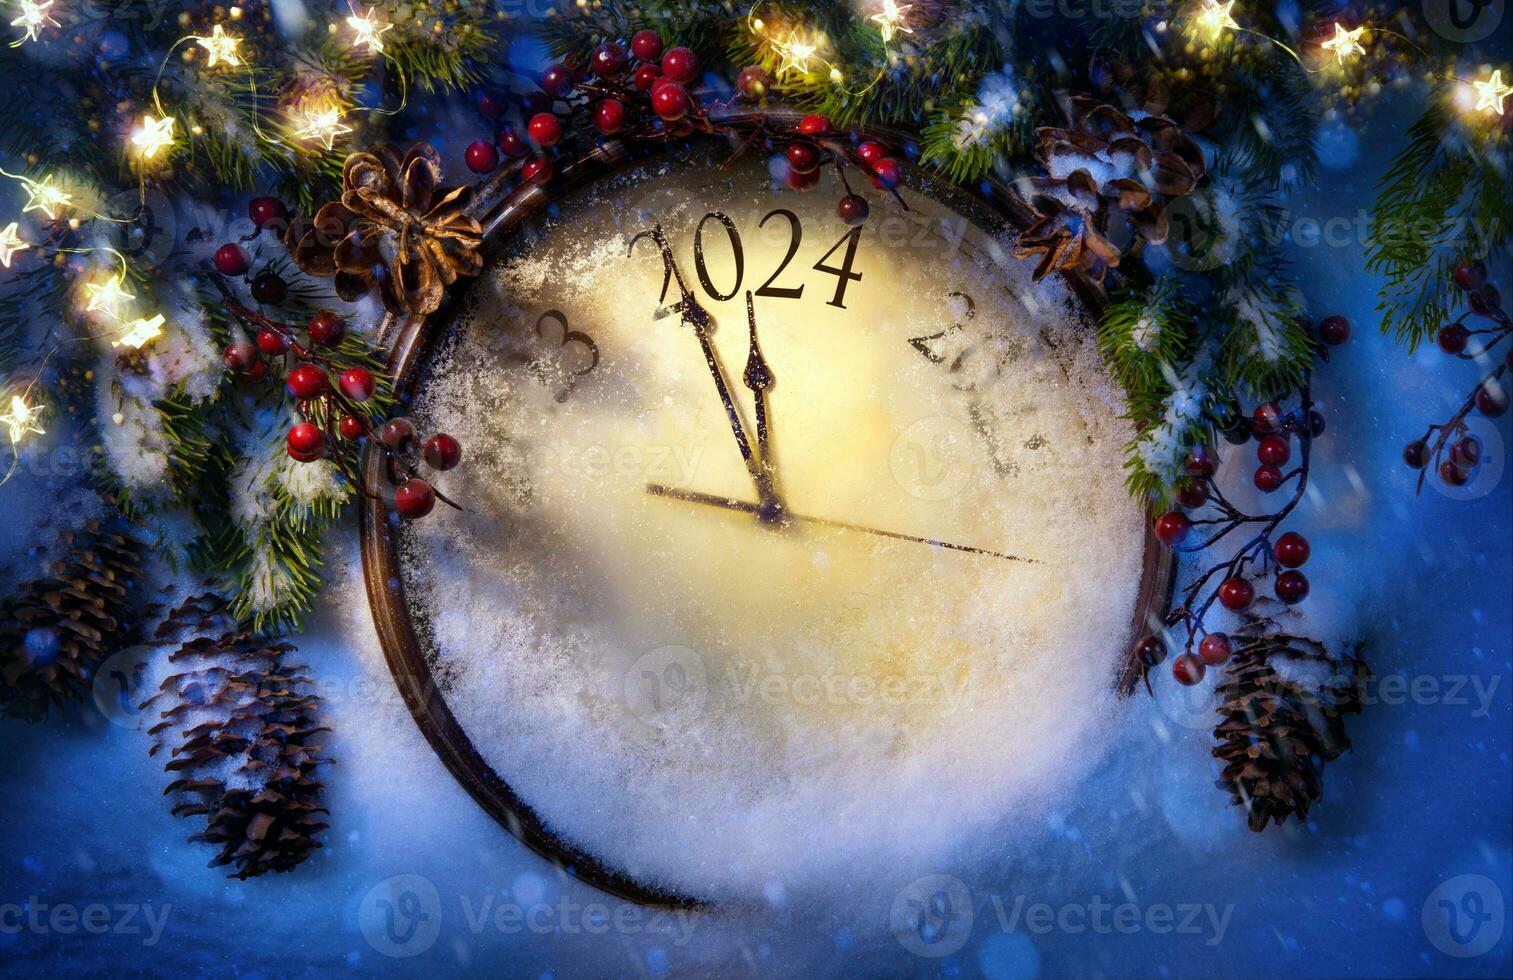 2024 Happy New Year. Christmas greeting card design background. Xmas holidays eve. Party poster, banner or invitation background with snow clocks and Christmas tree photo